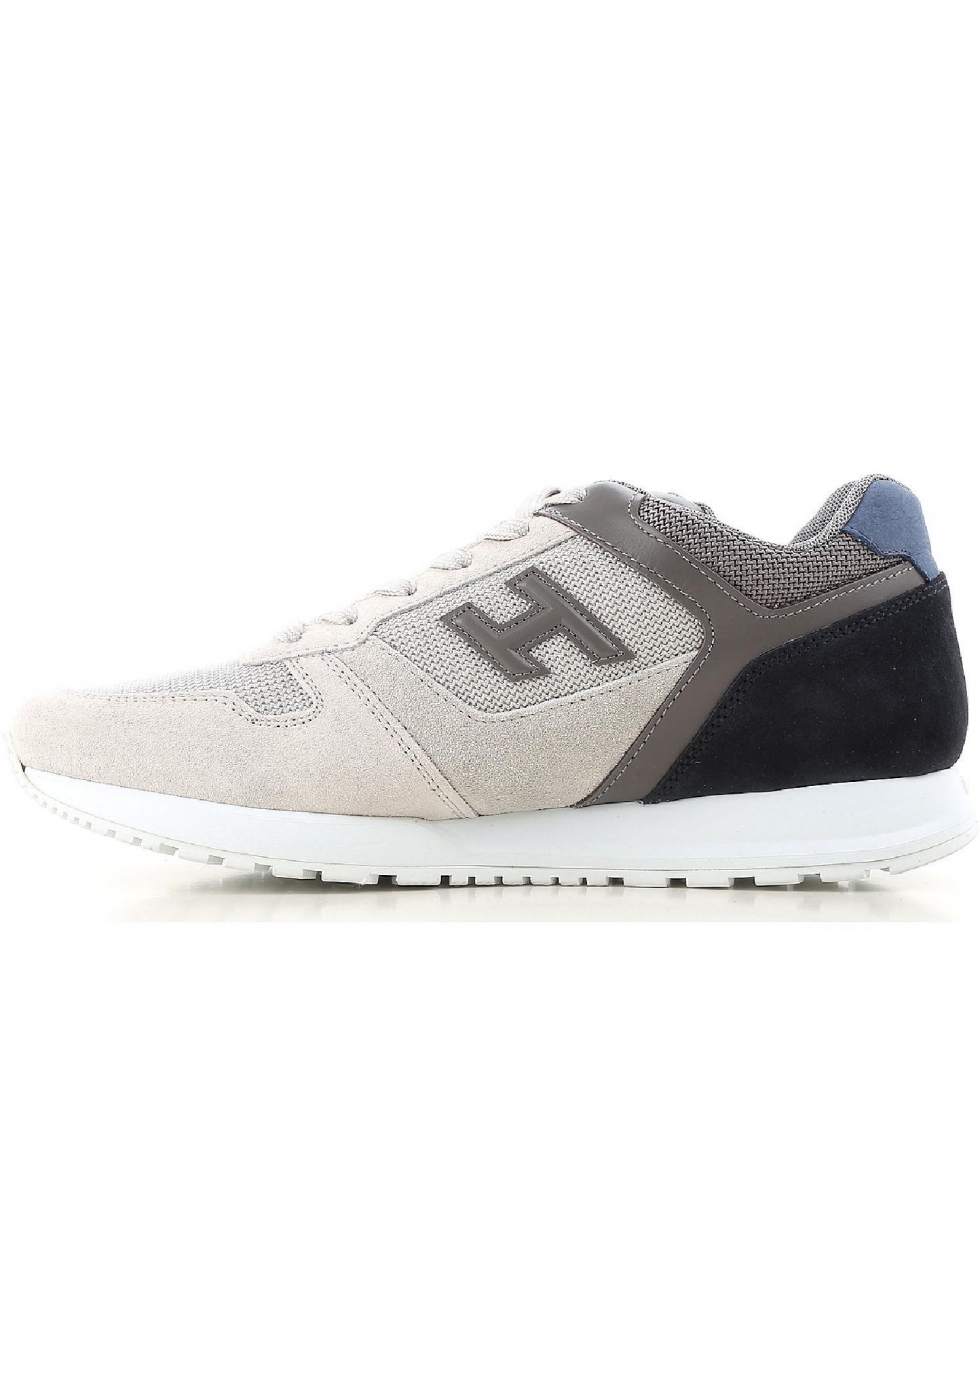 Hogan men's sneakers shoes in grey and off-white leather - Italian Boutique